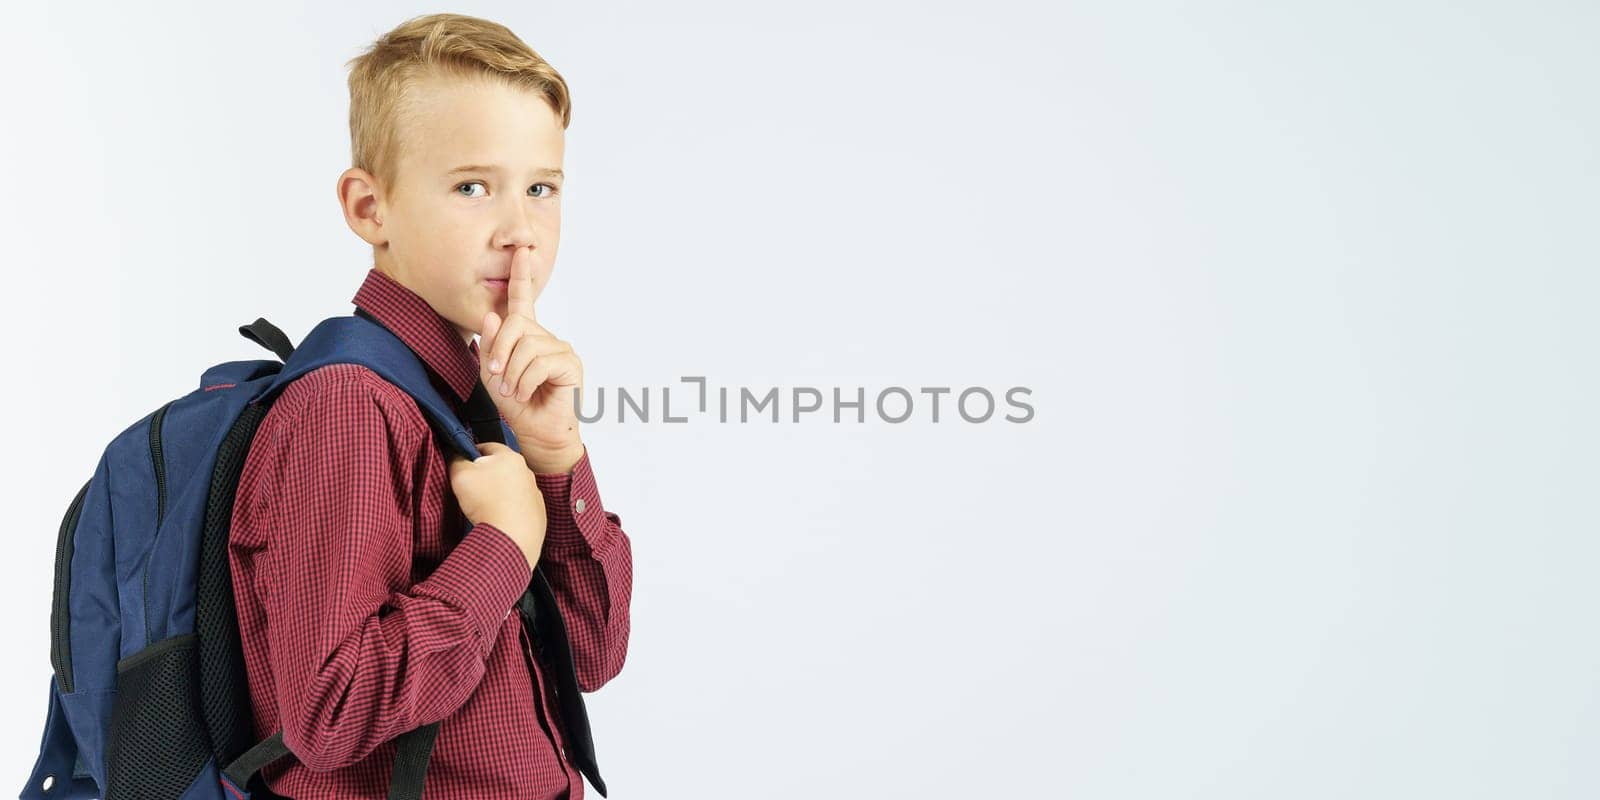 A schoolboy holds a school backpack and shows a gesture with his hand - be quiet. Education concept